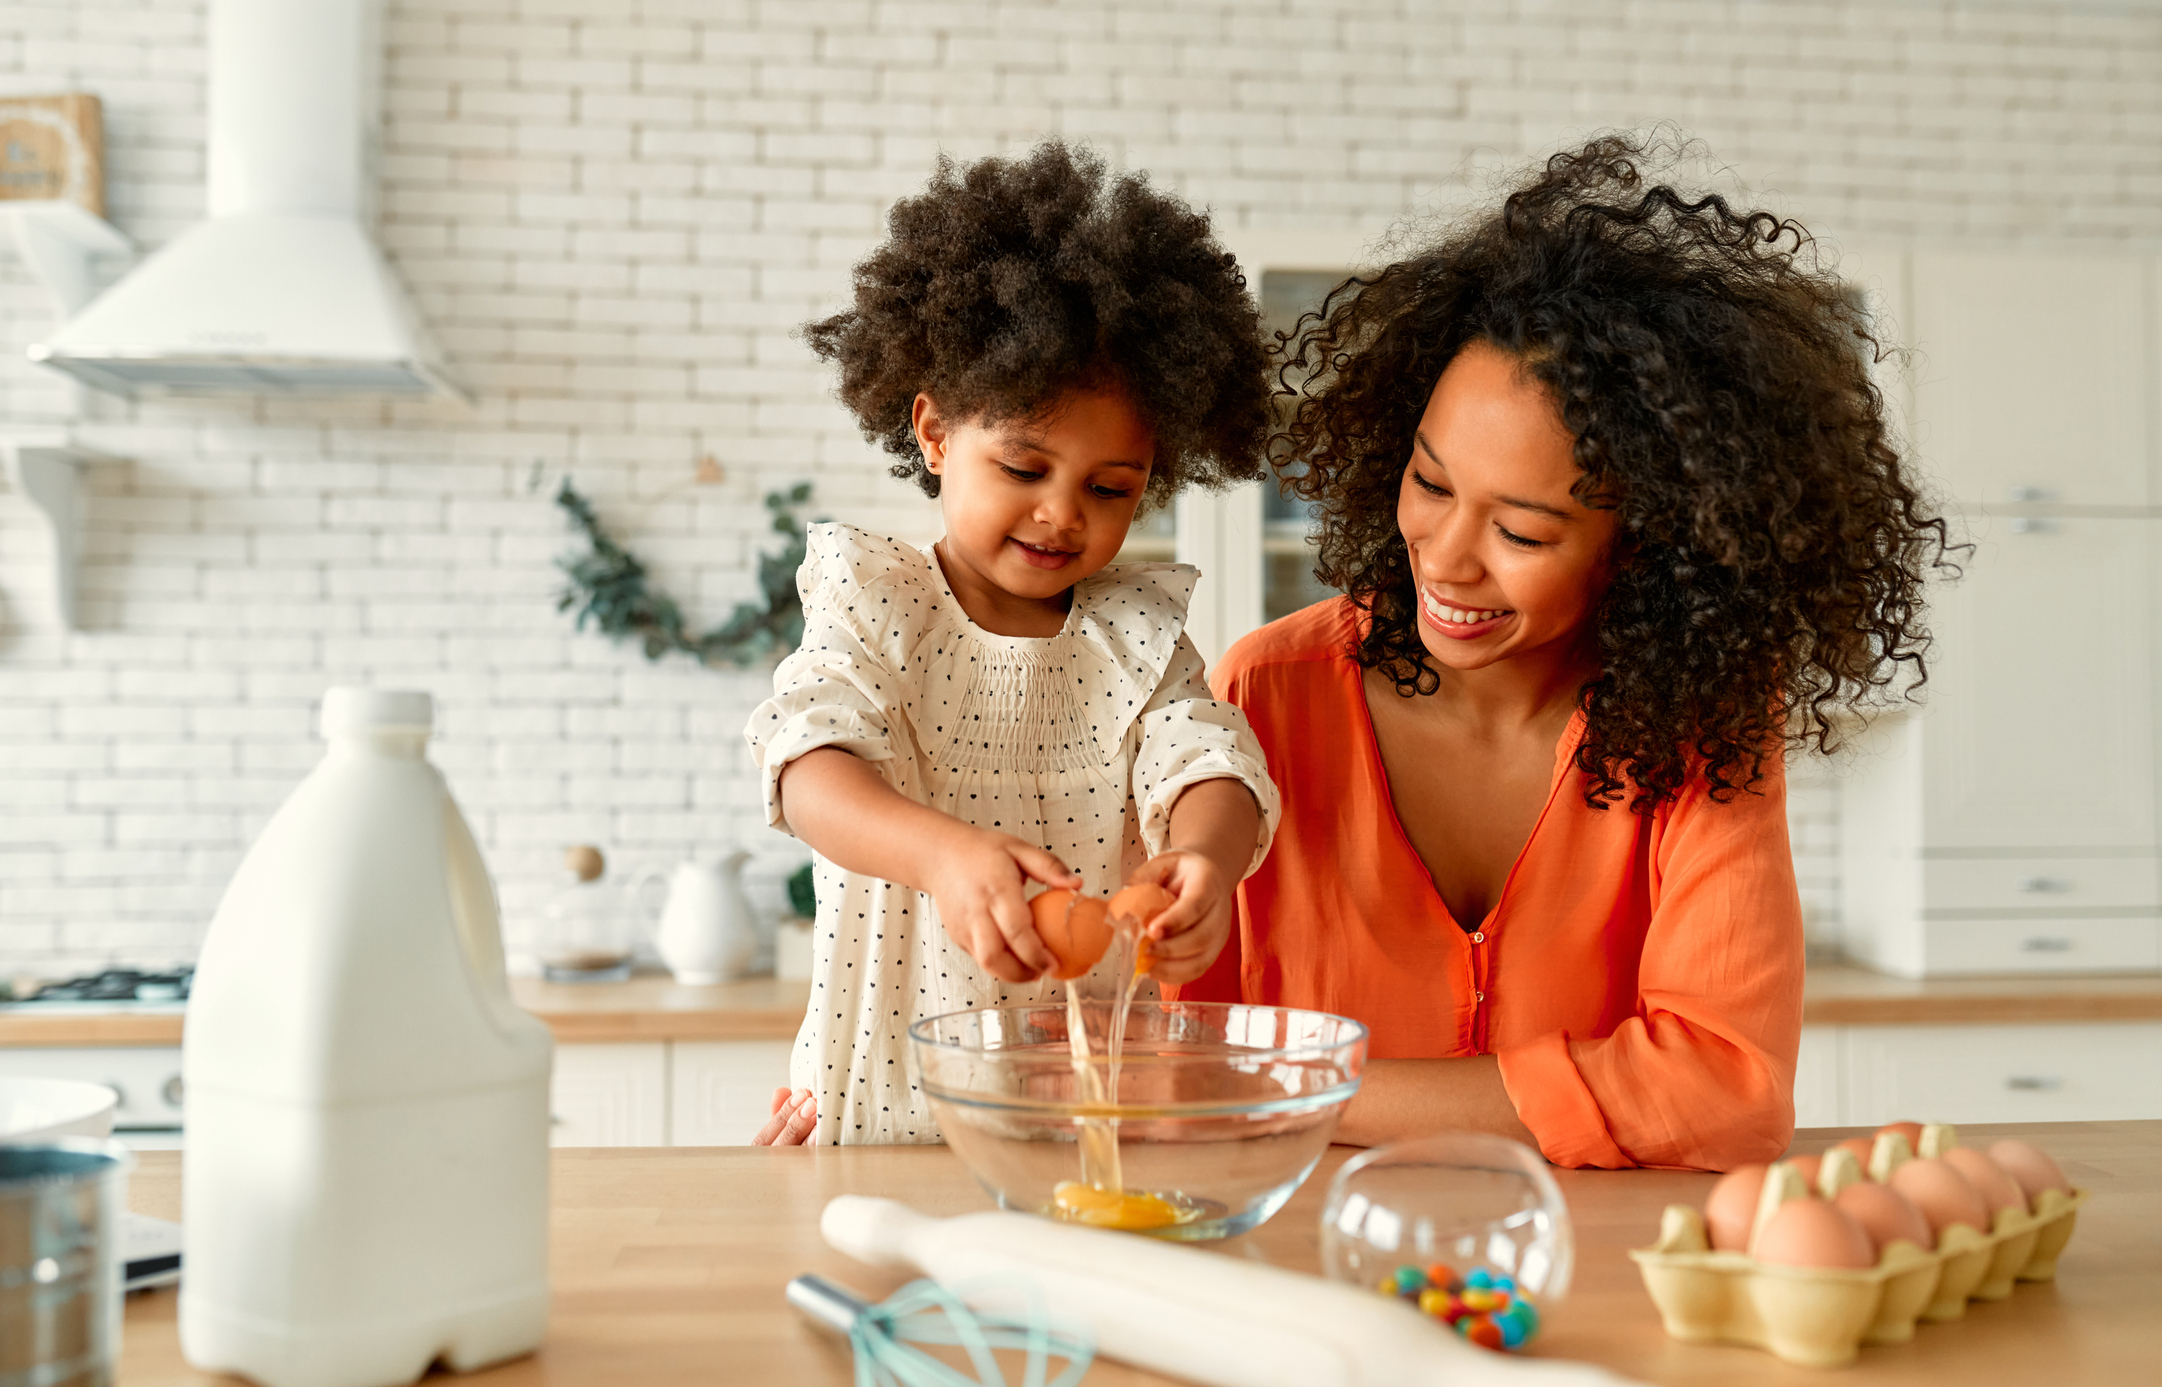 Mother and child happily baking together in a kitchen